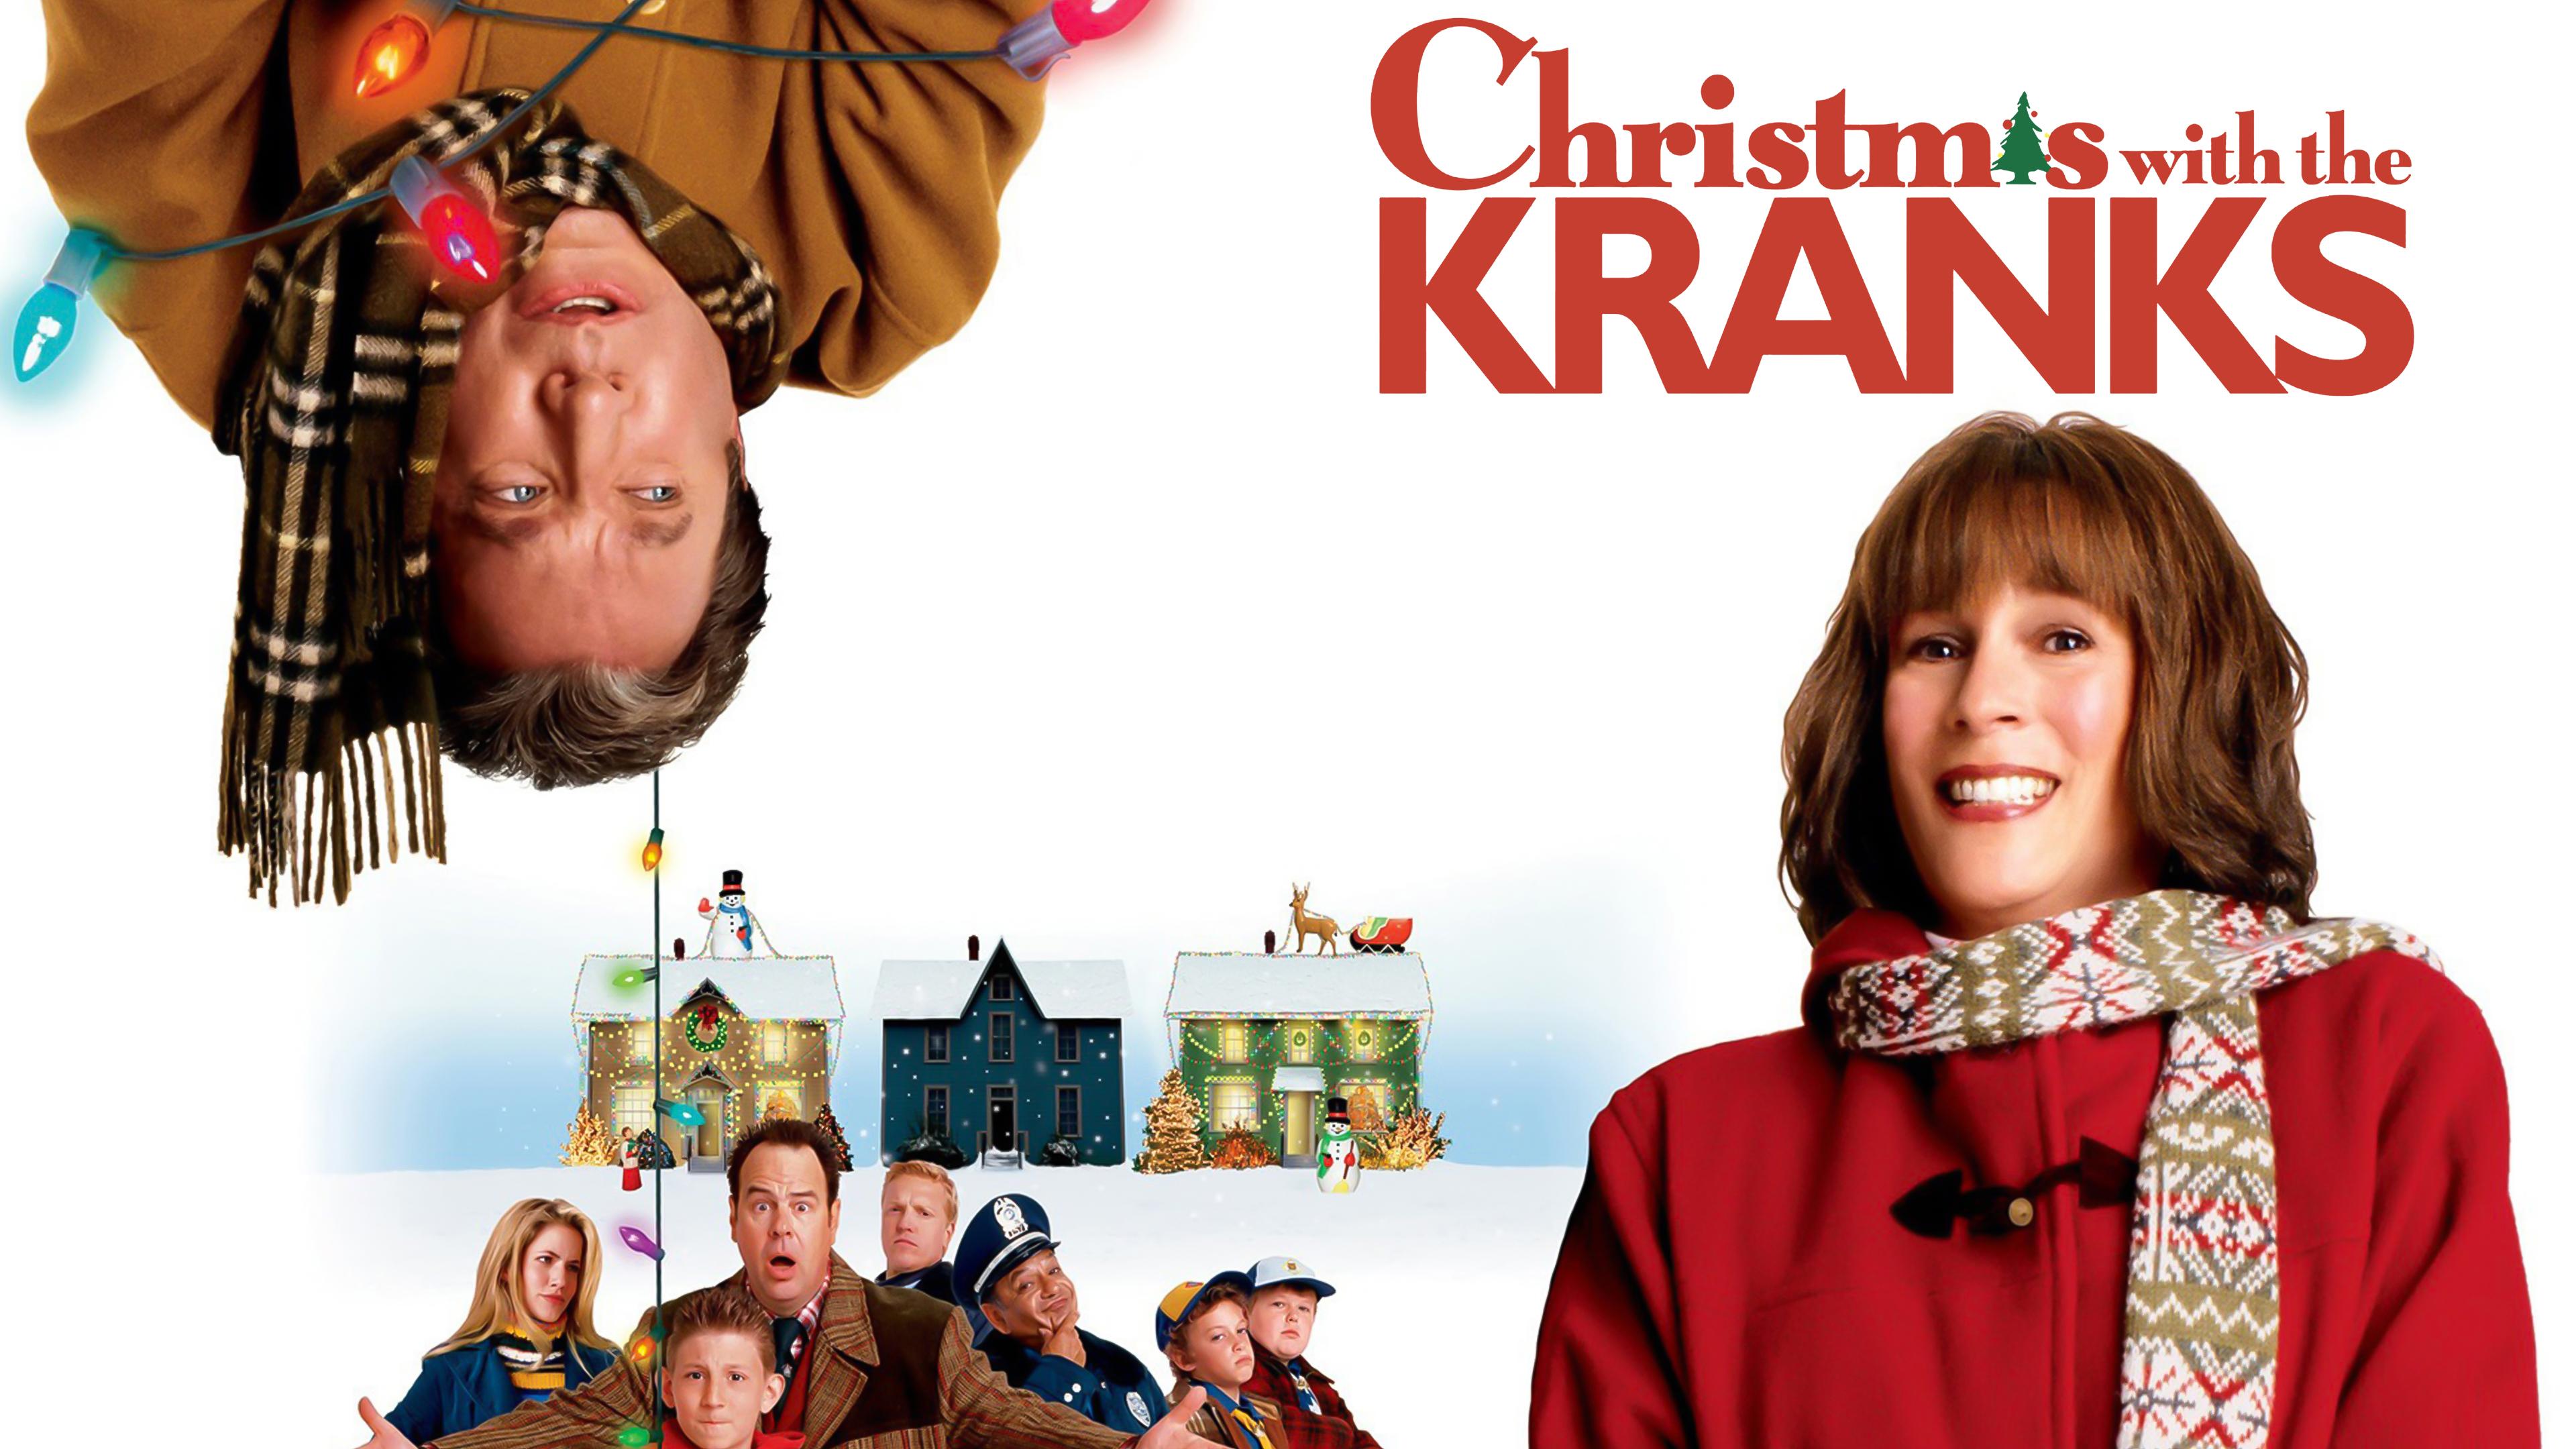 Watch Christmas With the Kranks Streaming Online on Philo (Free Trial)